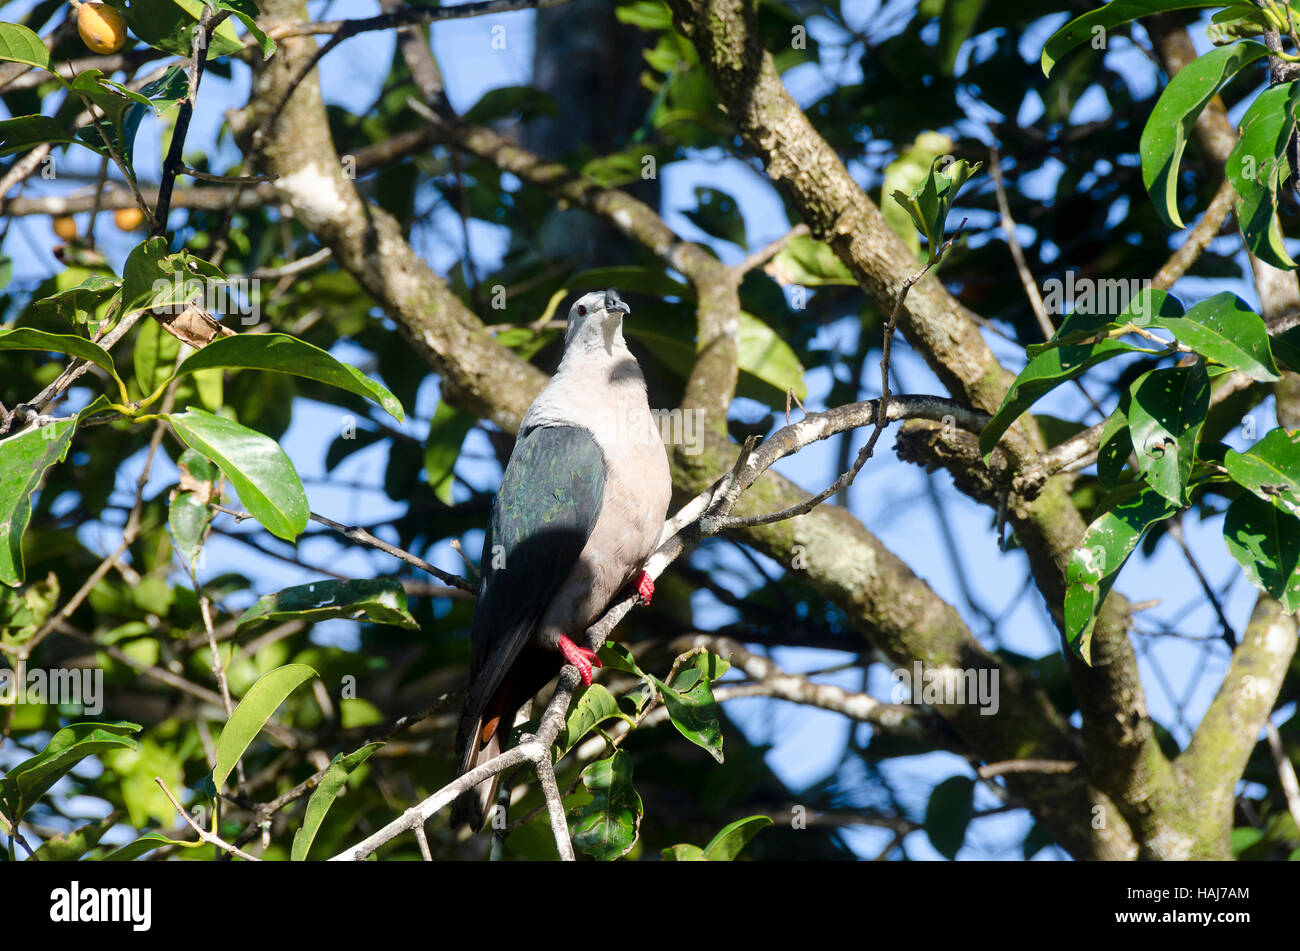 Pacific imperial pigeon, Anaiki, Niue, South Pacific, Oceania Stock Photo